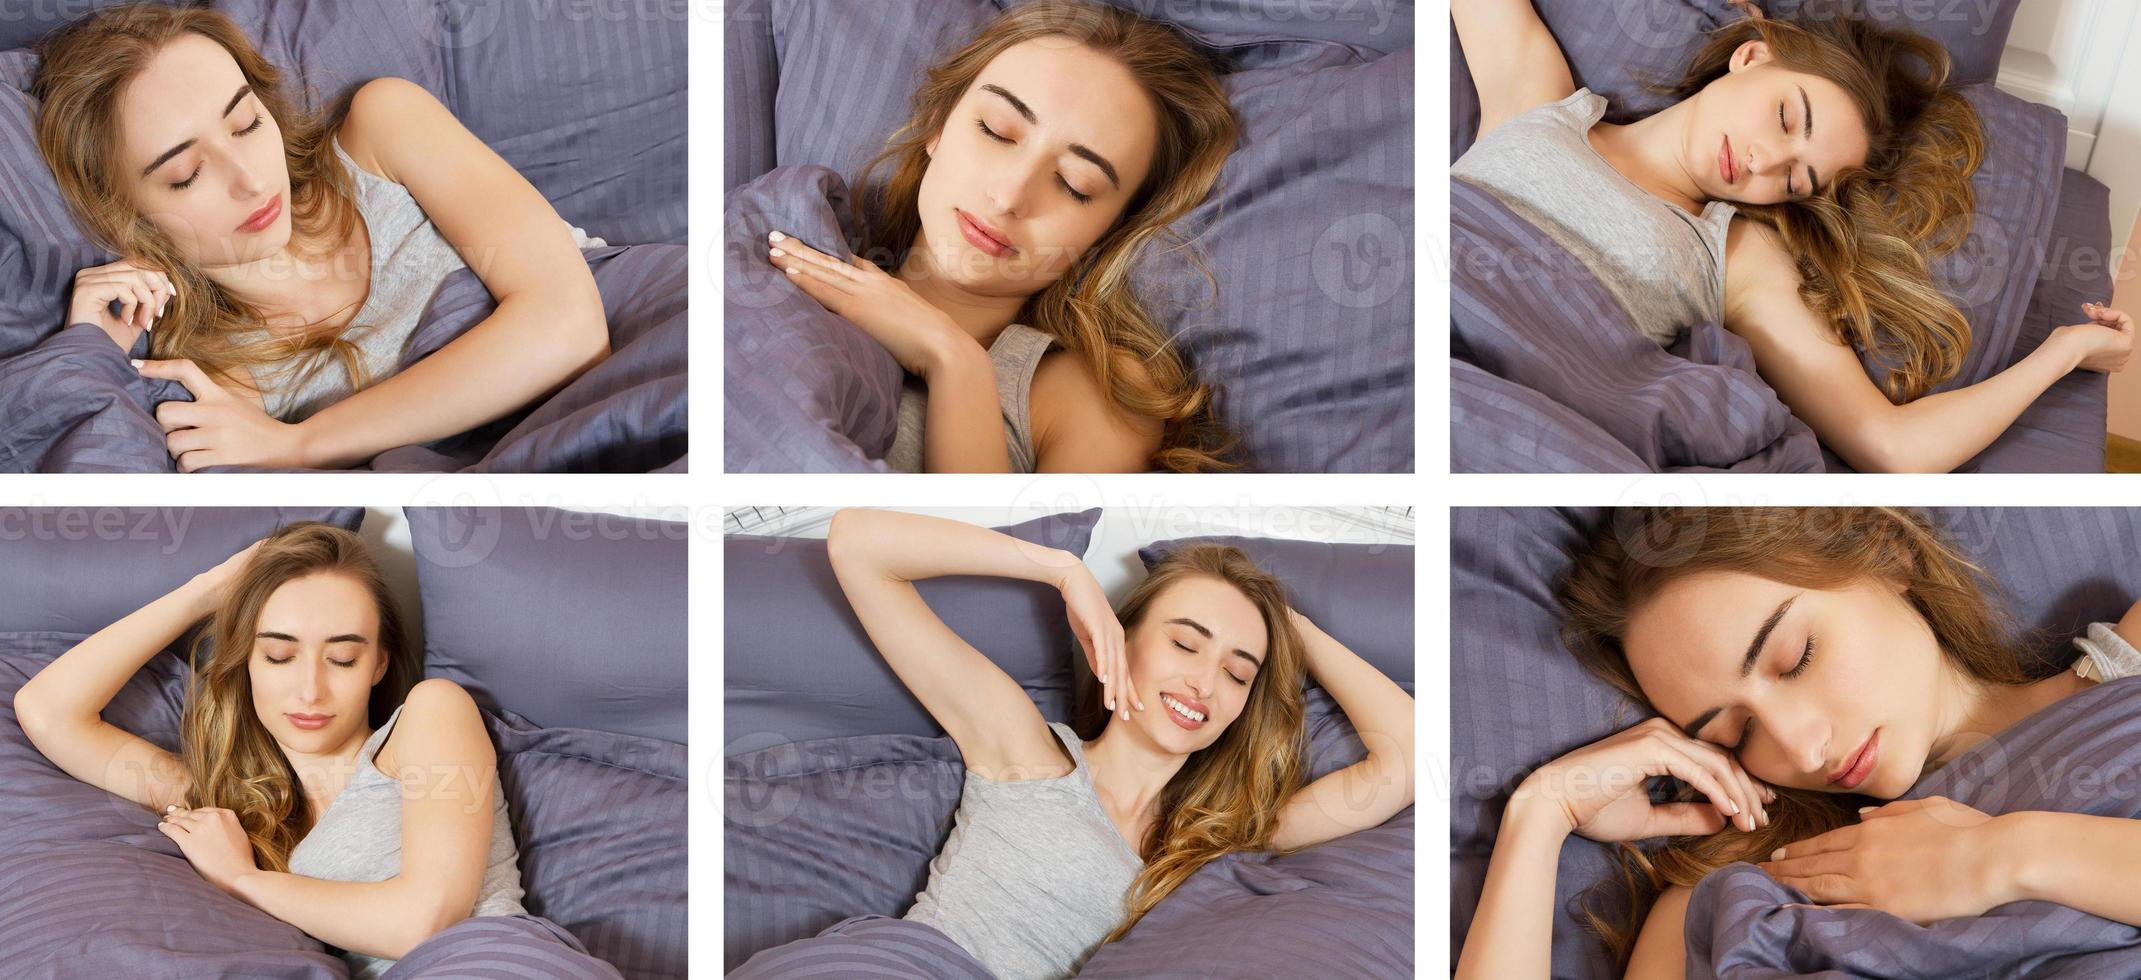 Beautiful girl sleeps in the bedroom - collage. Sleeping woman in bed close up billboard. Young beautiful woman sleeping. Portrait of the beautiful young woman sleeping in dark bed. Sleep collage photo